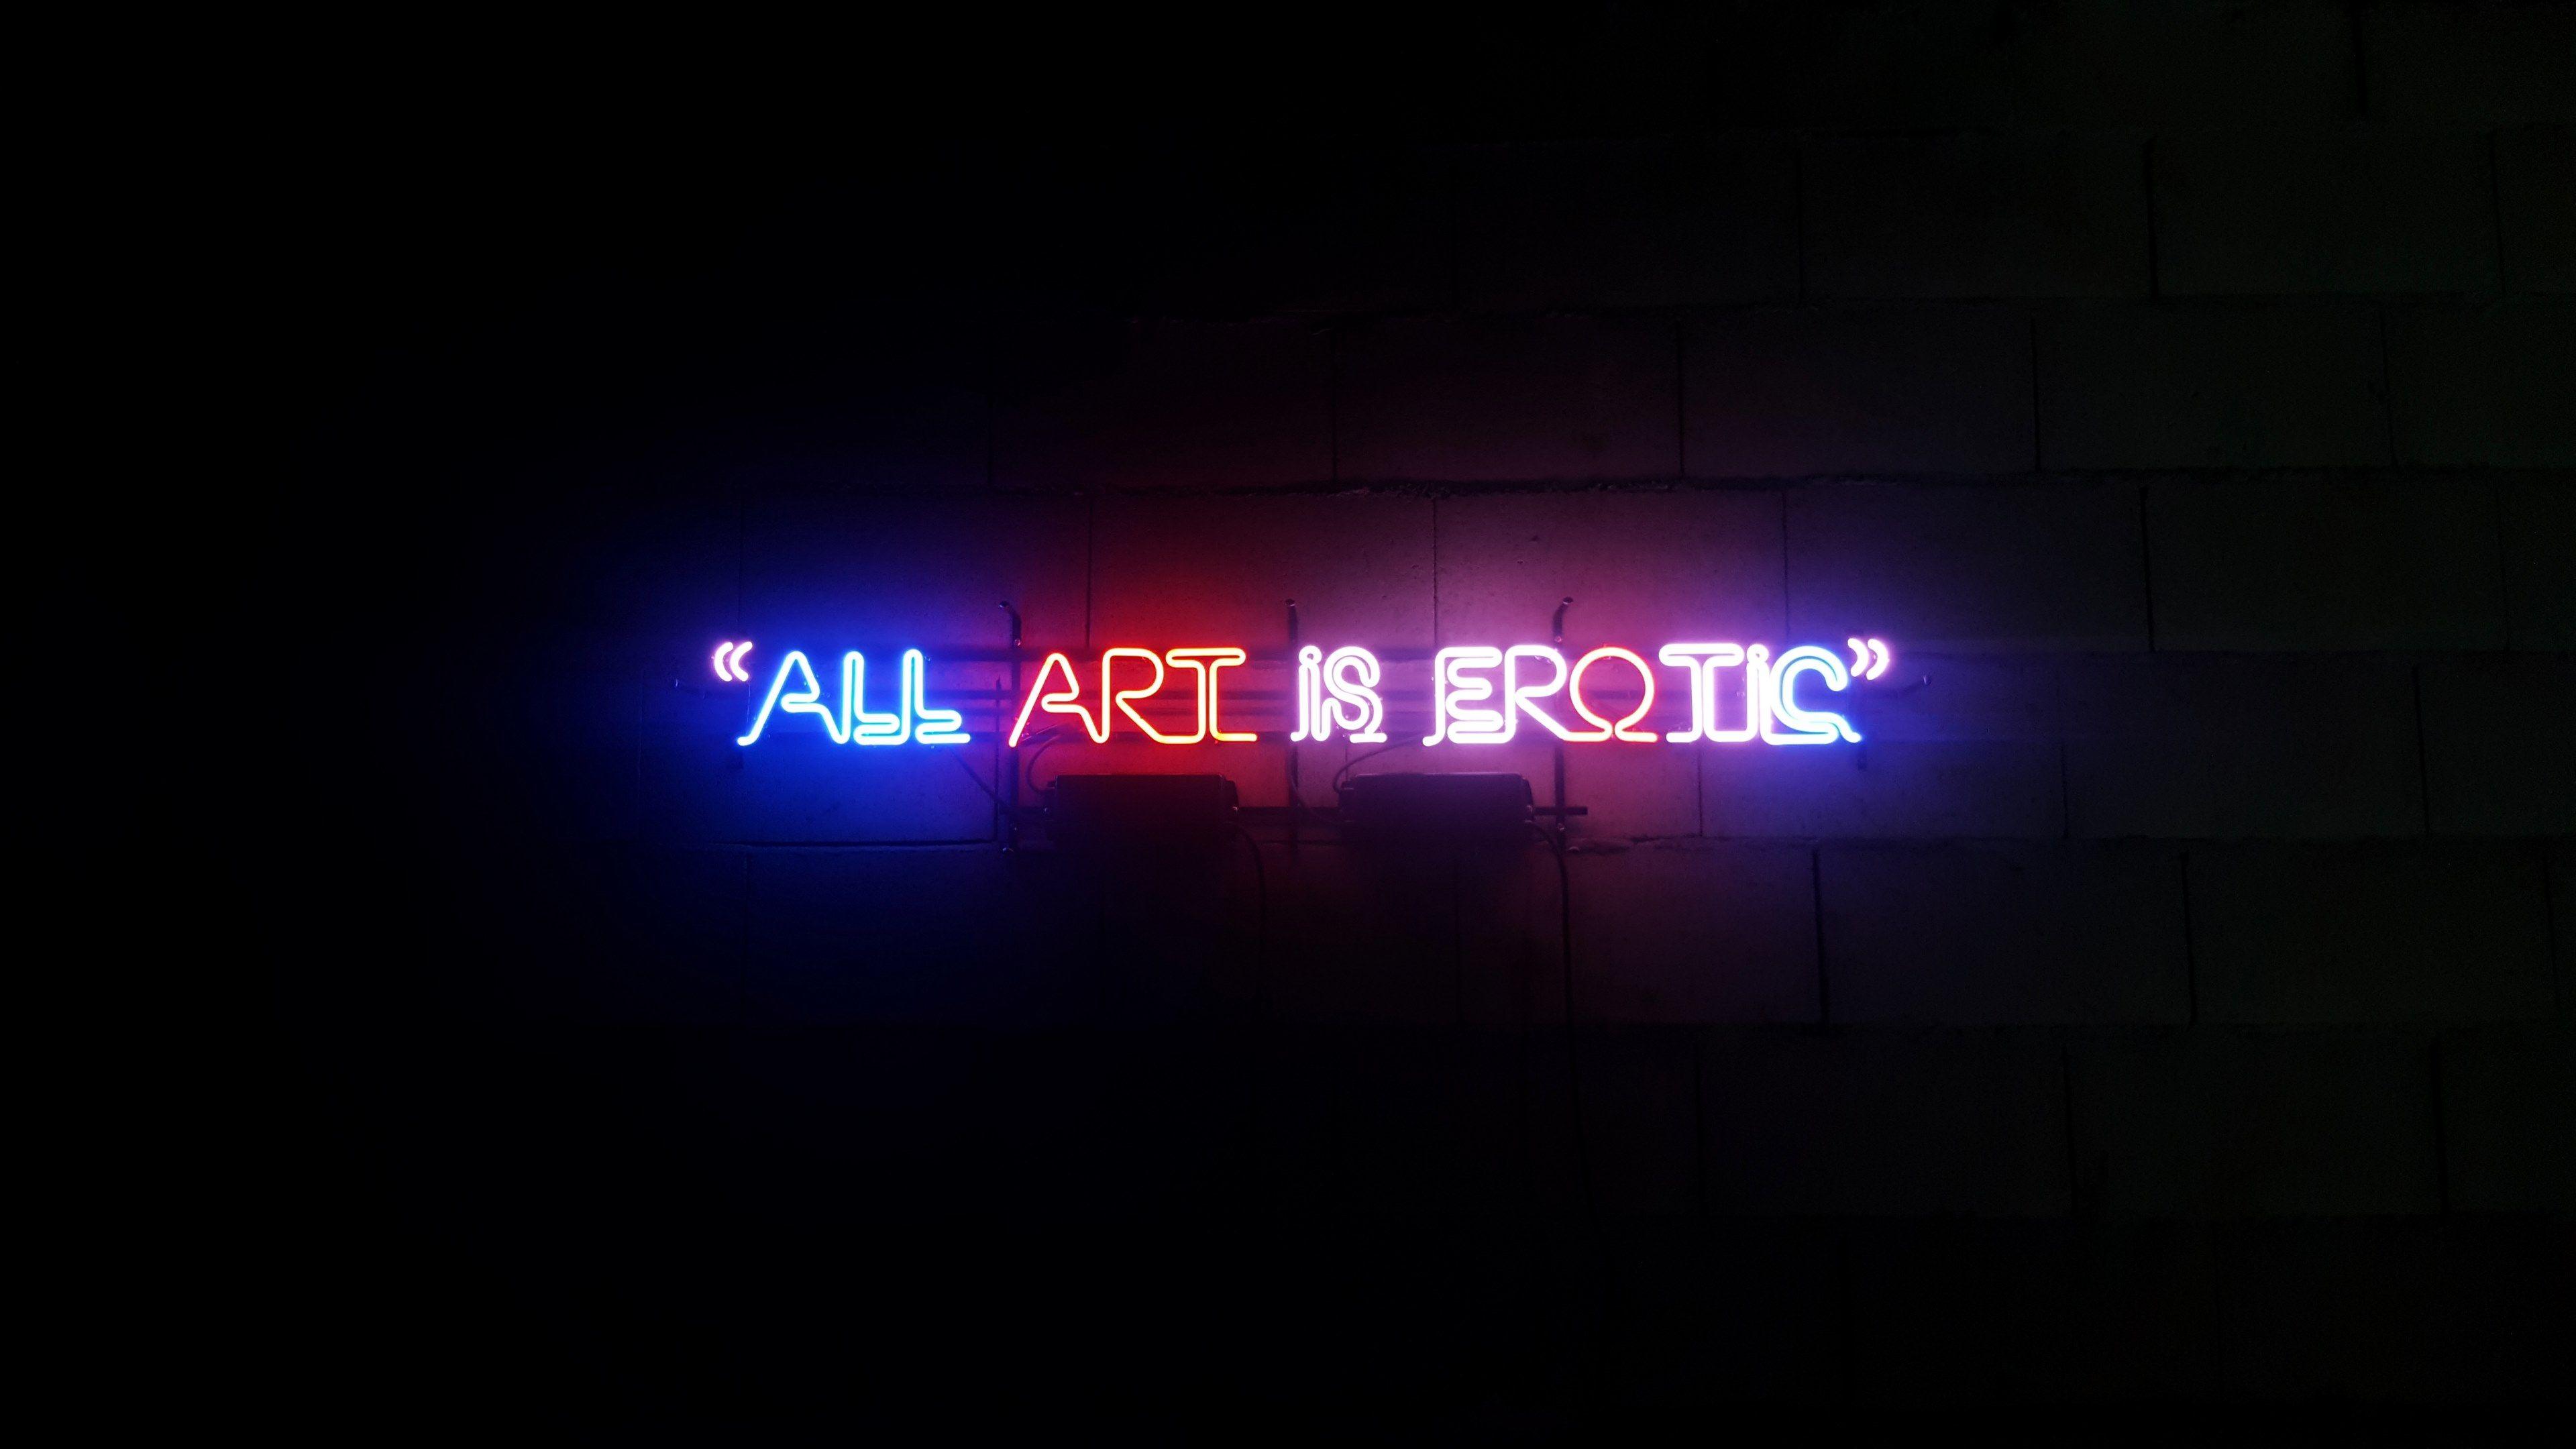 all art is erotic colorful neon sign on black background